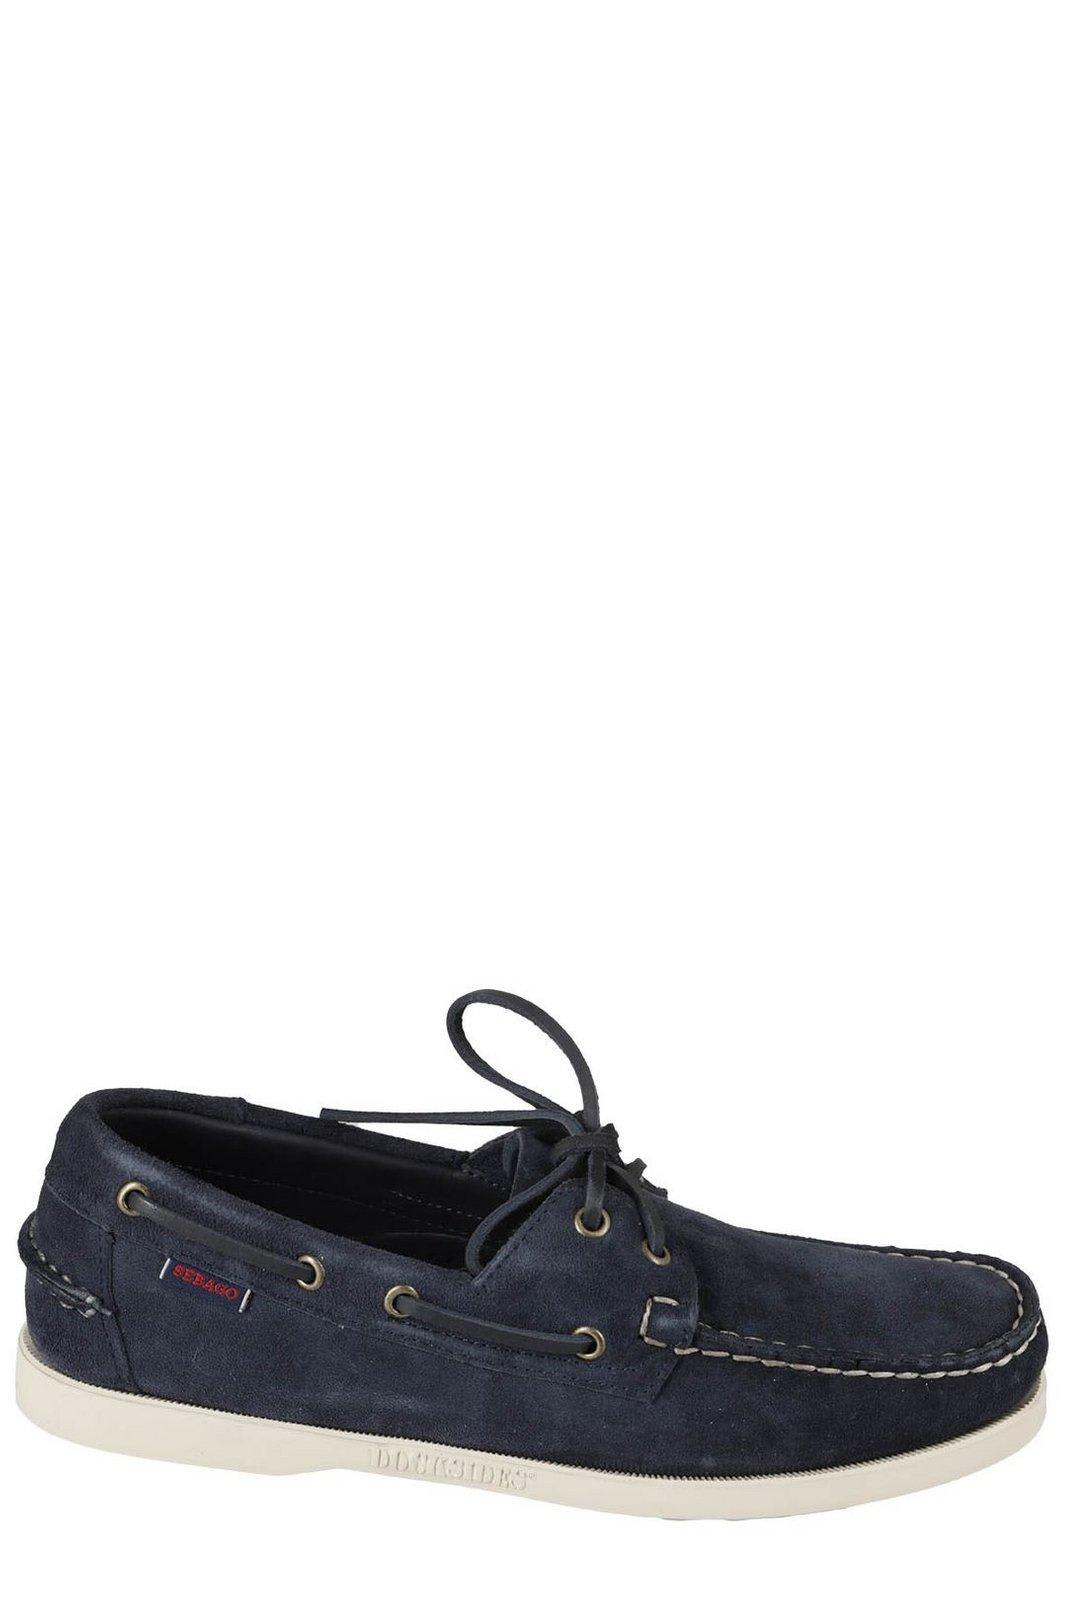 Shop Sebago Lace-up Round Toe Boat Shoes In Blue Navy